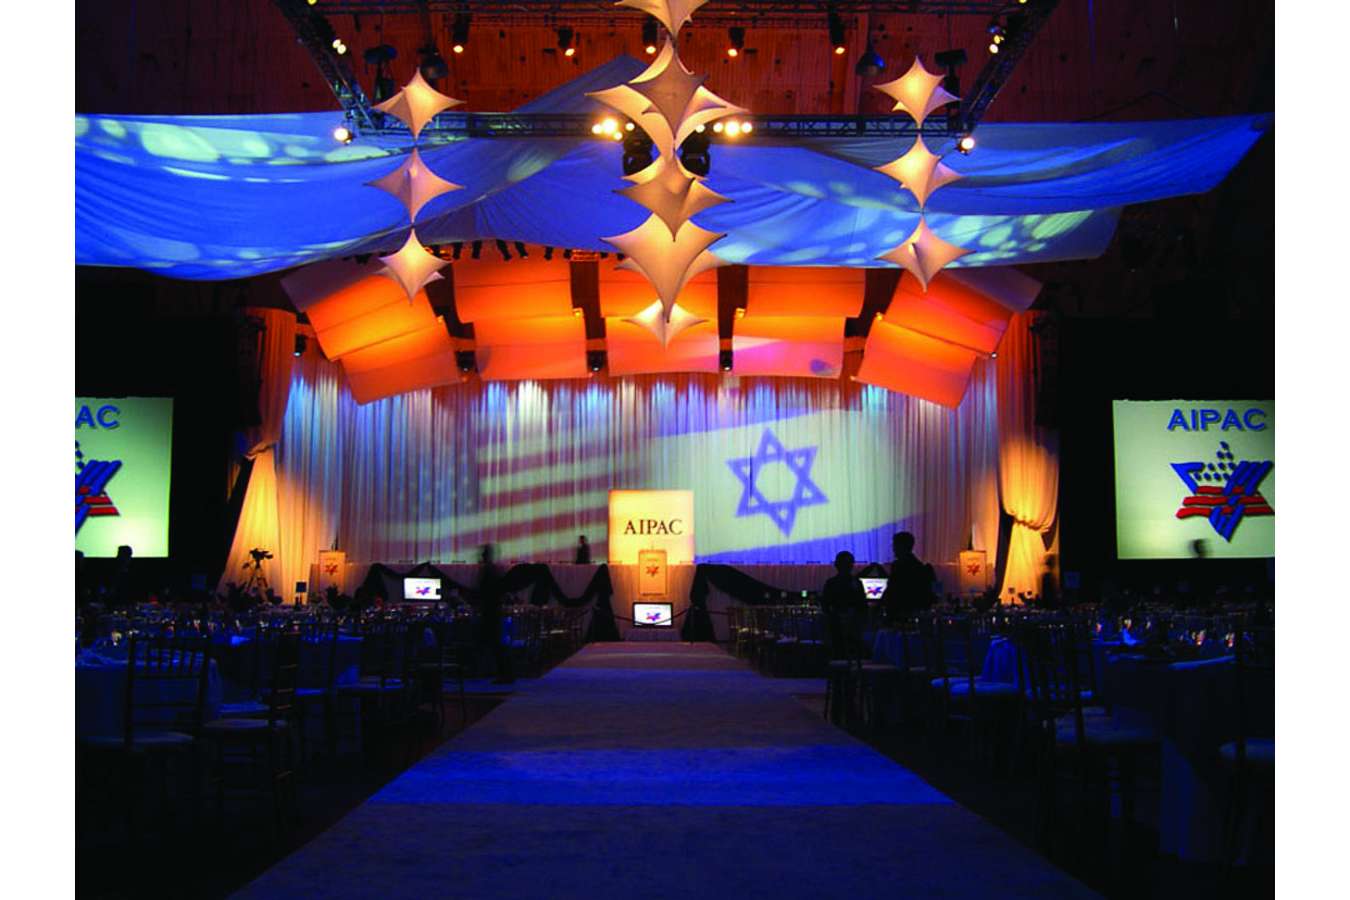 AIPA03 2a stage : The football-field sized DC Armory transformed for the AIPAC Event